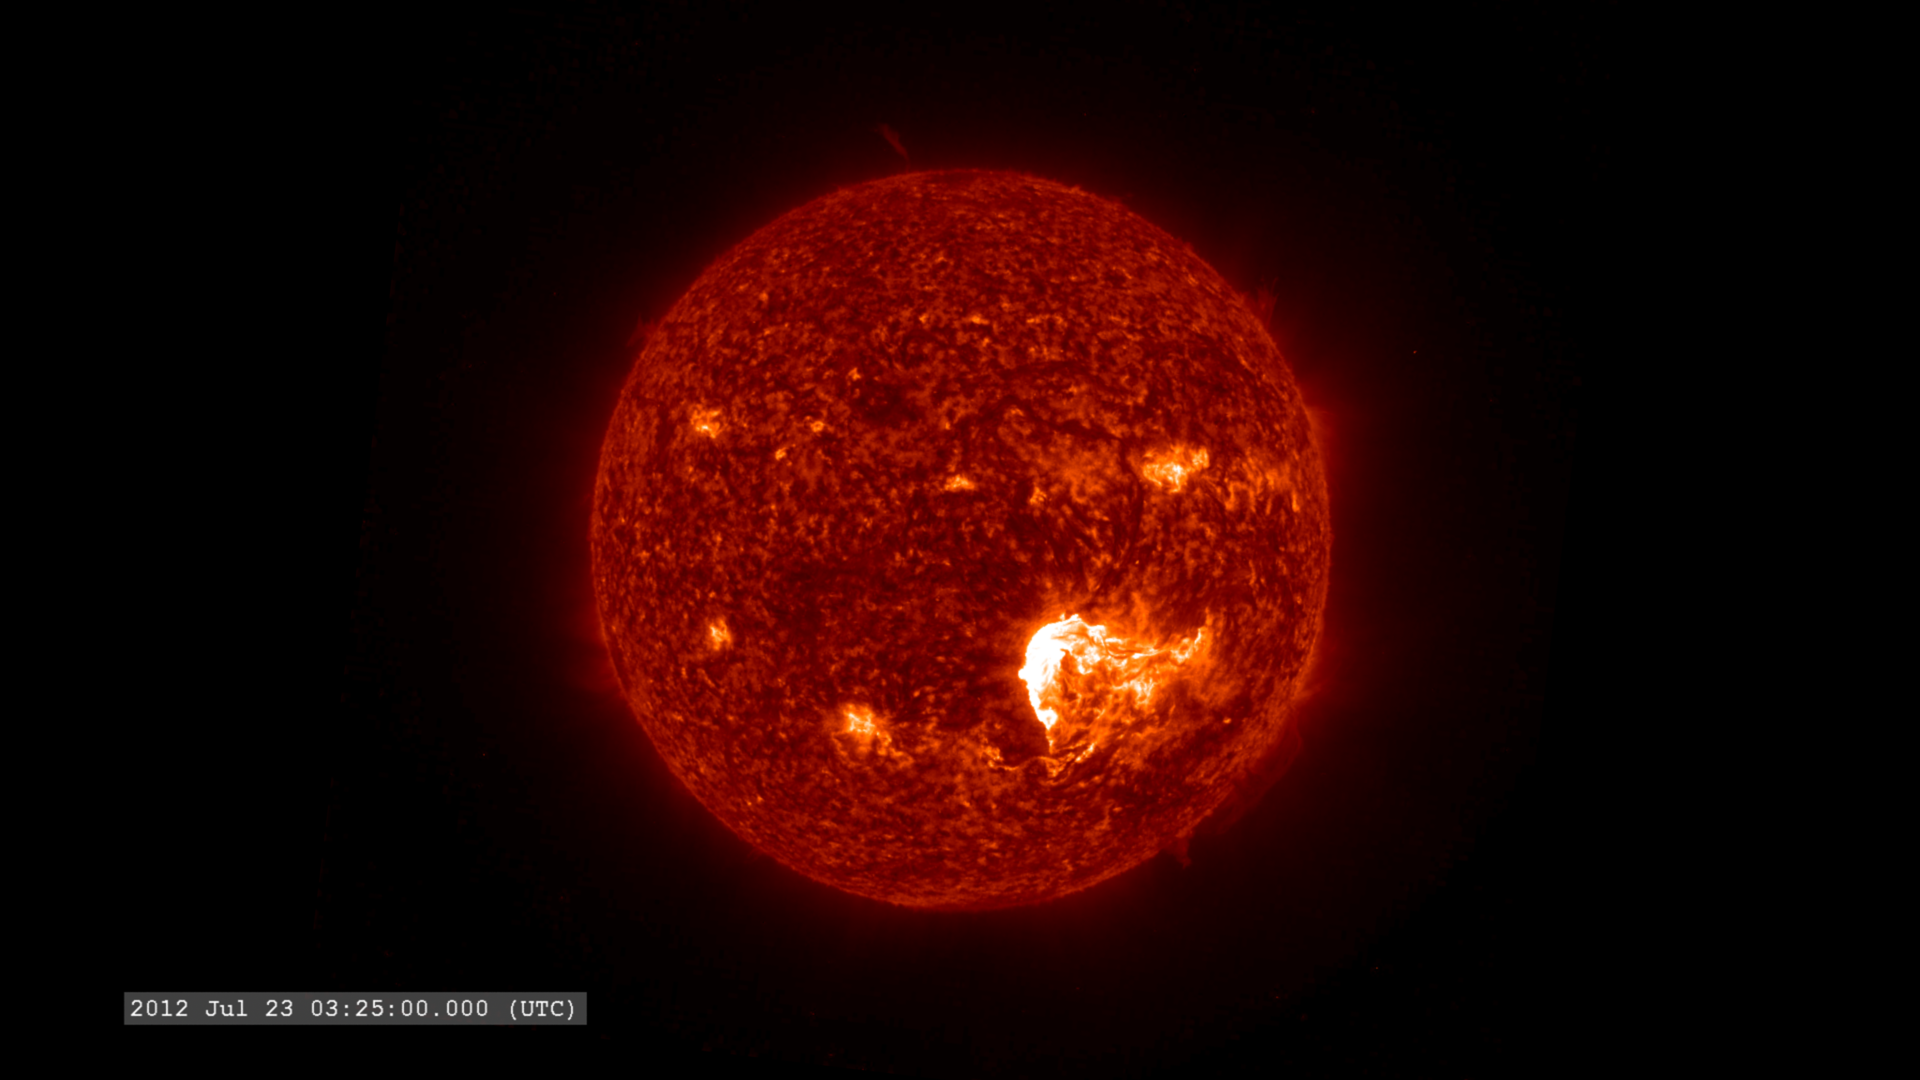 Preview Image for As Seen by STEREO-A: The Carrington-Class CME of 2012